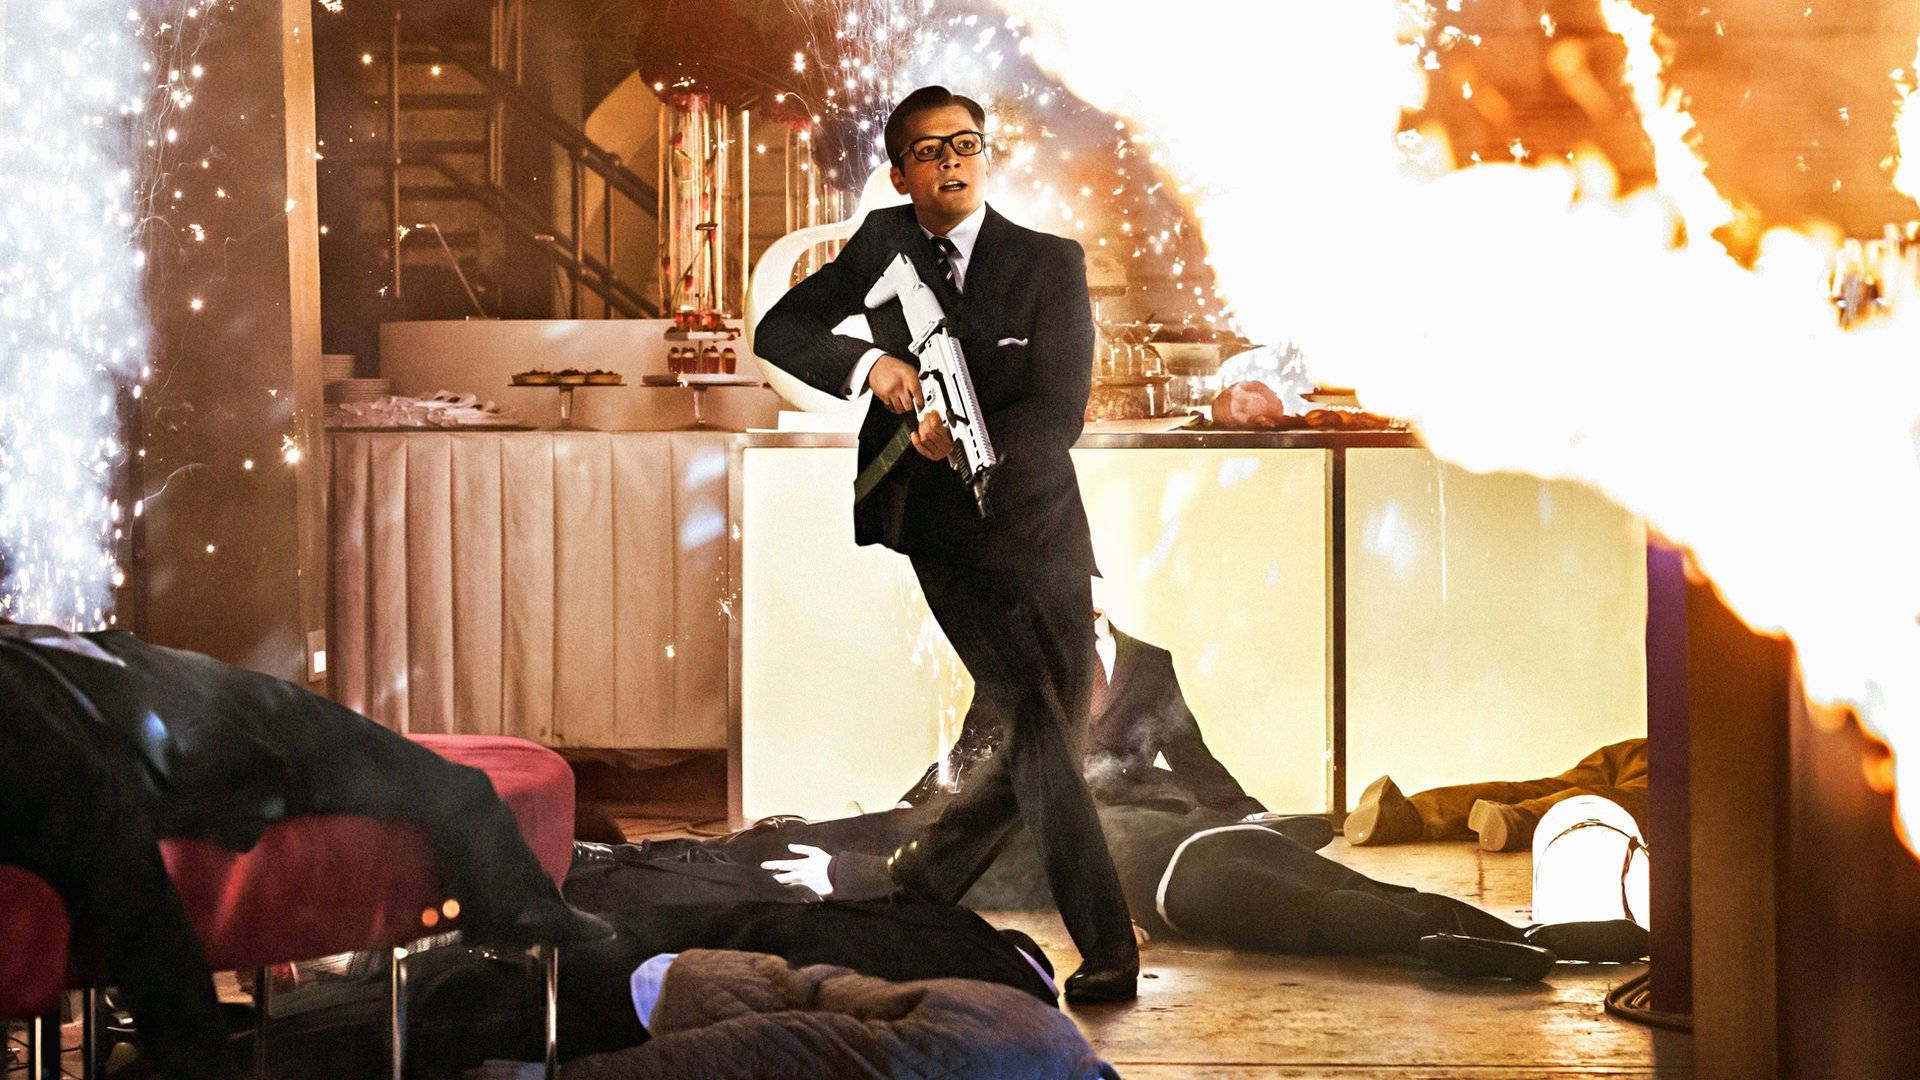 Action-packed scene from Kingsman: The Secret Service featuring Eggsy Wallpaper